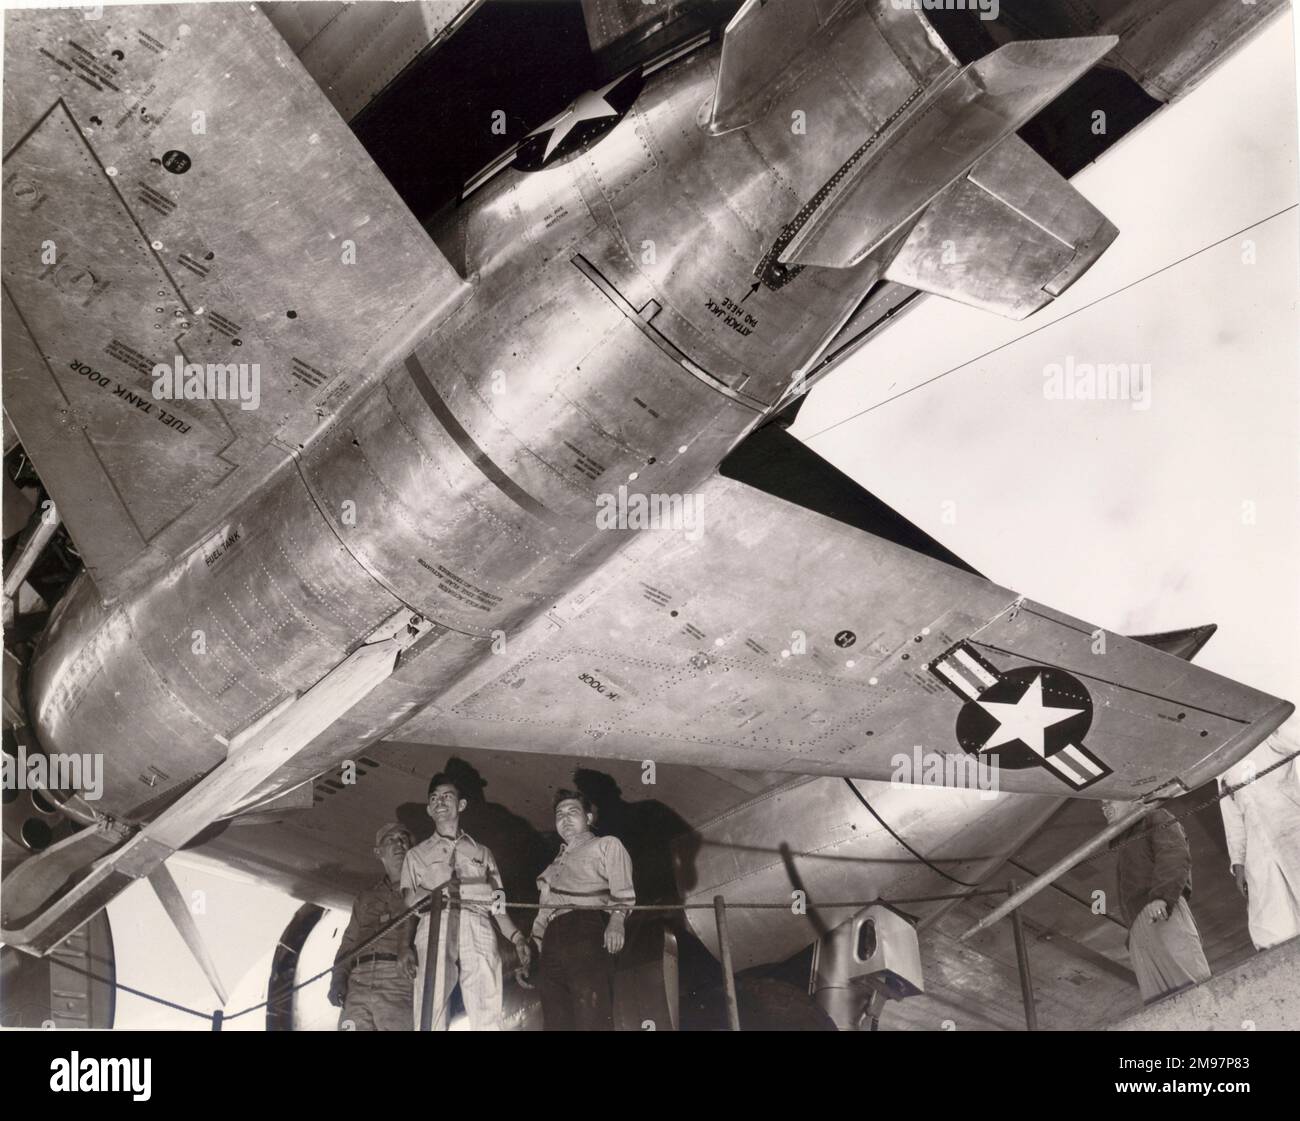 McDonnell XF-85 Goblin underneath its mothership. Stock Photo